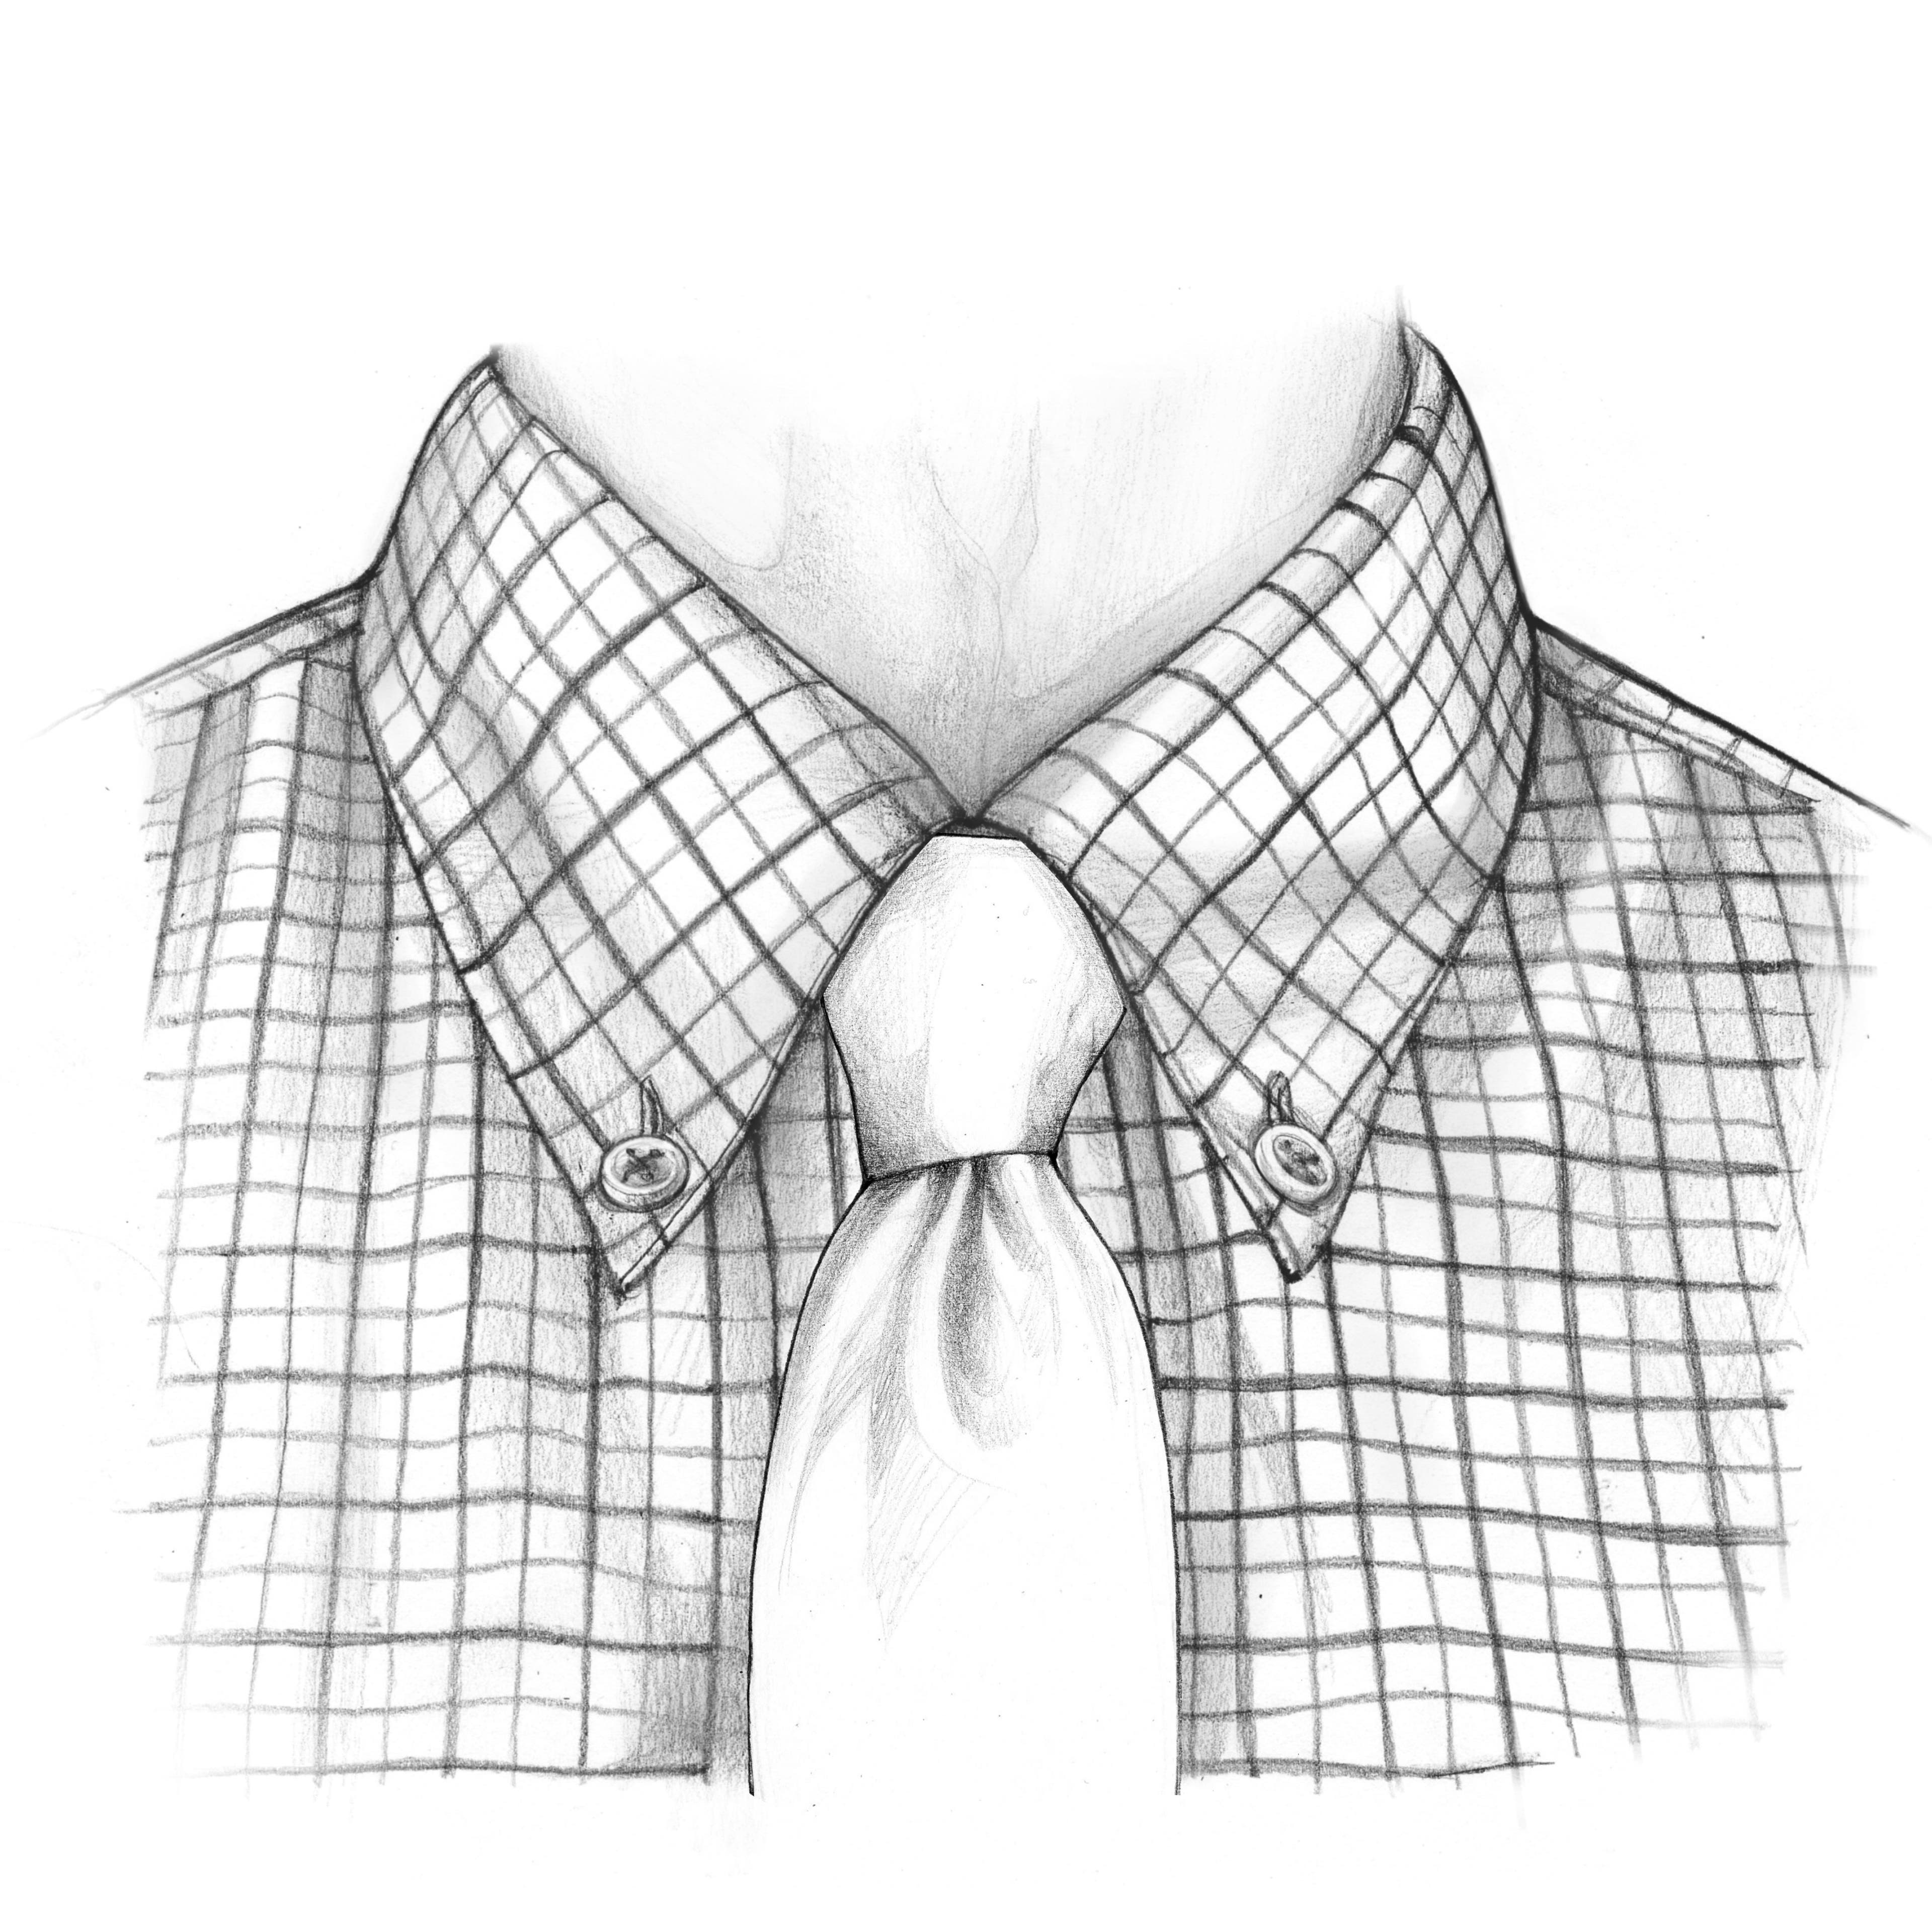 The Oriental (Simple) Knot 